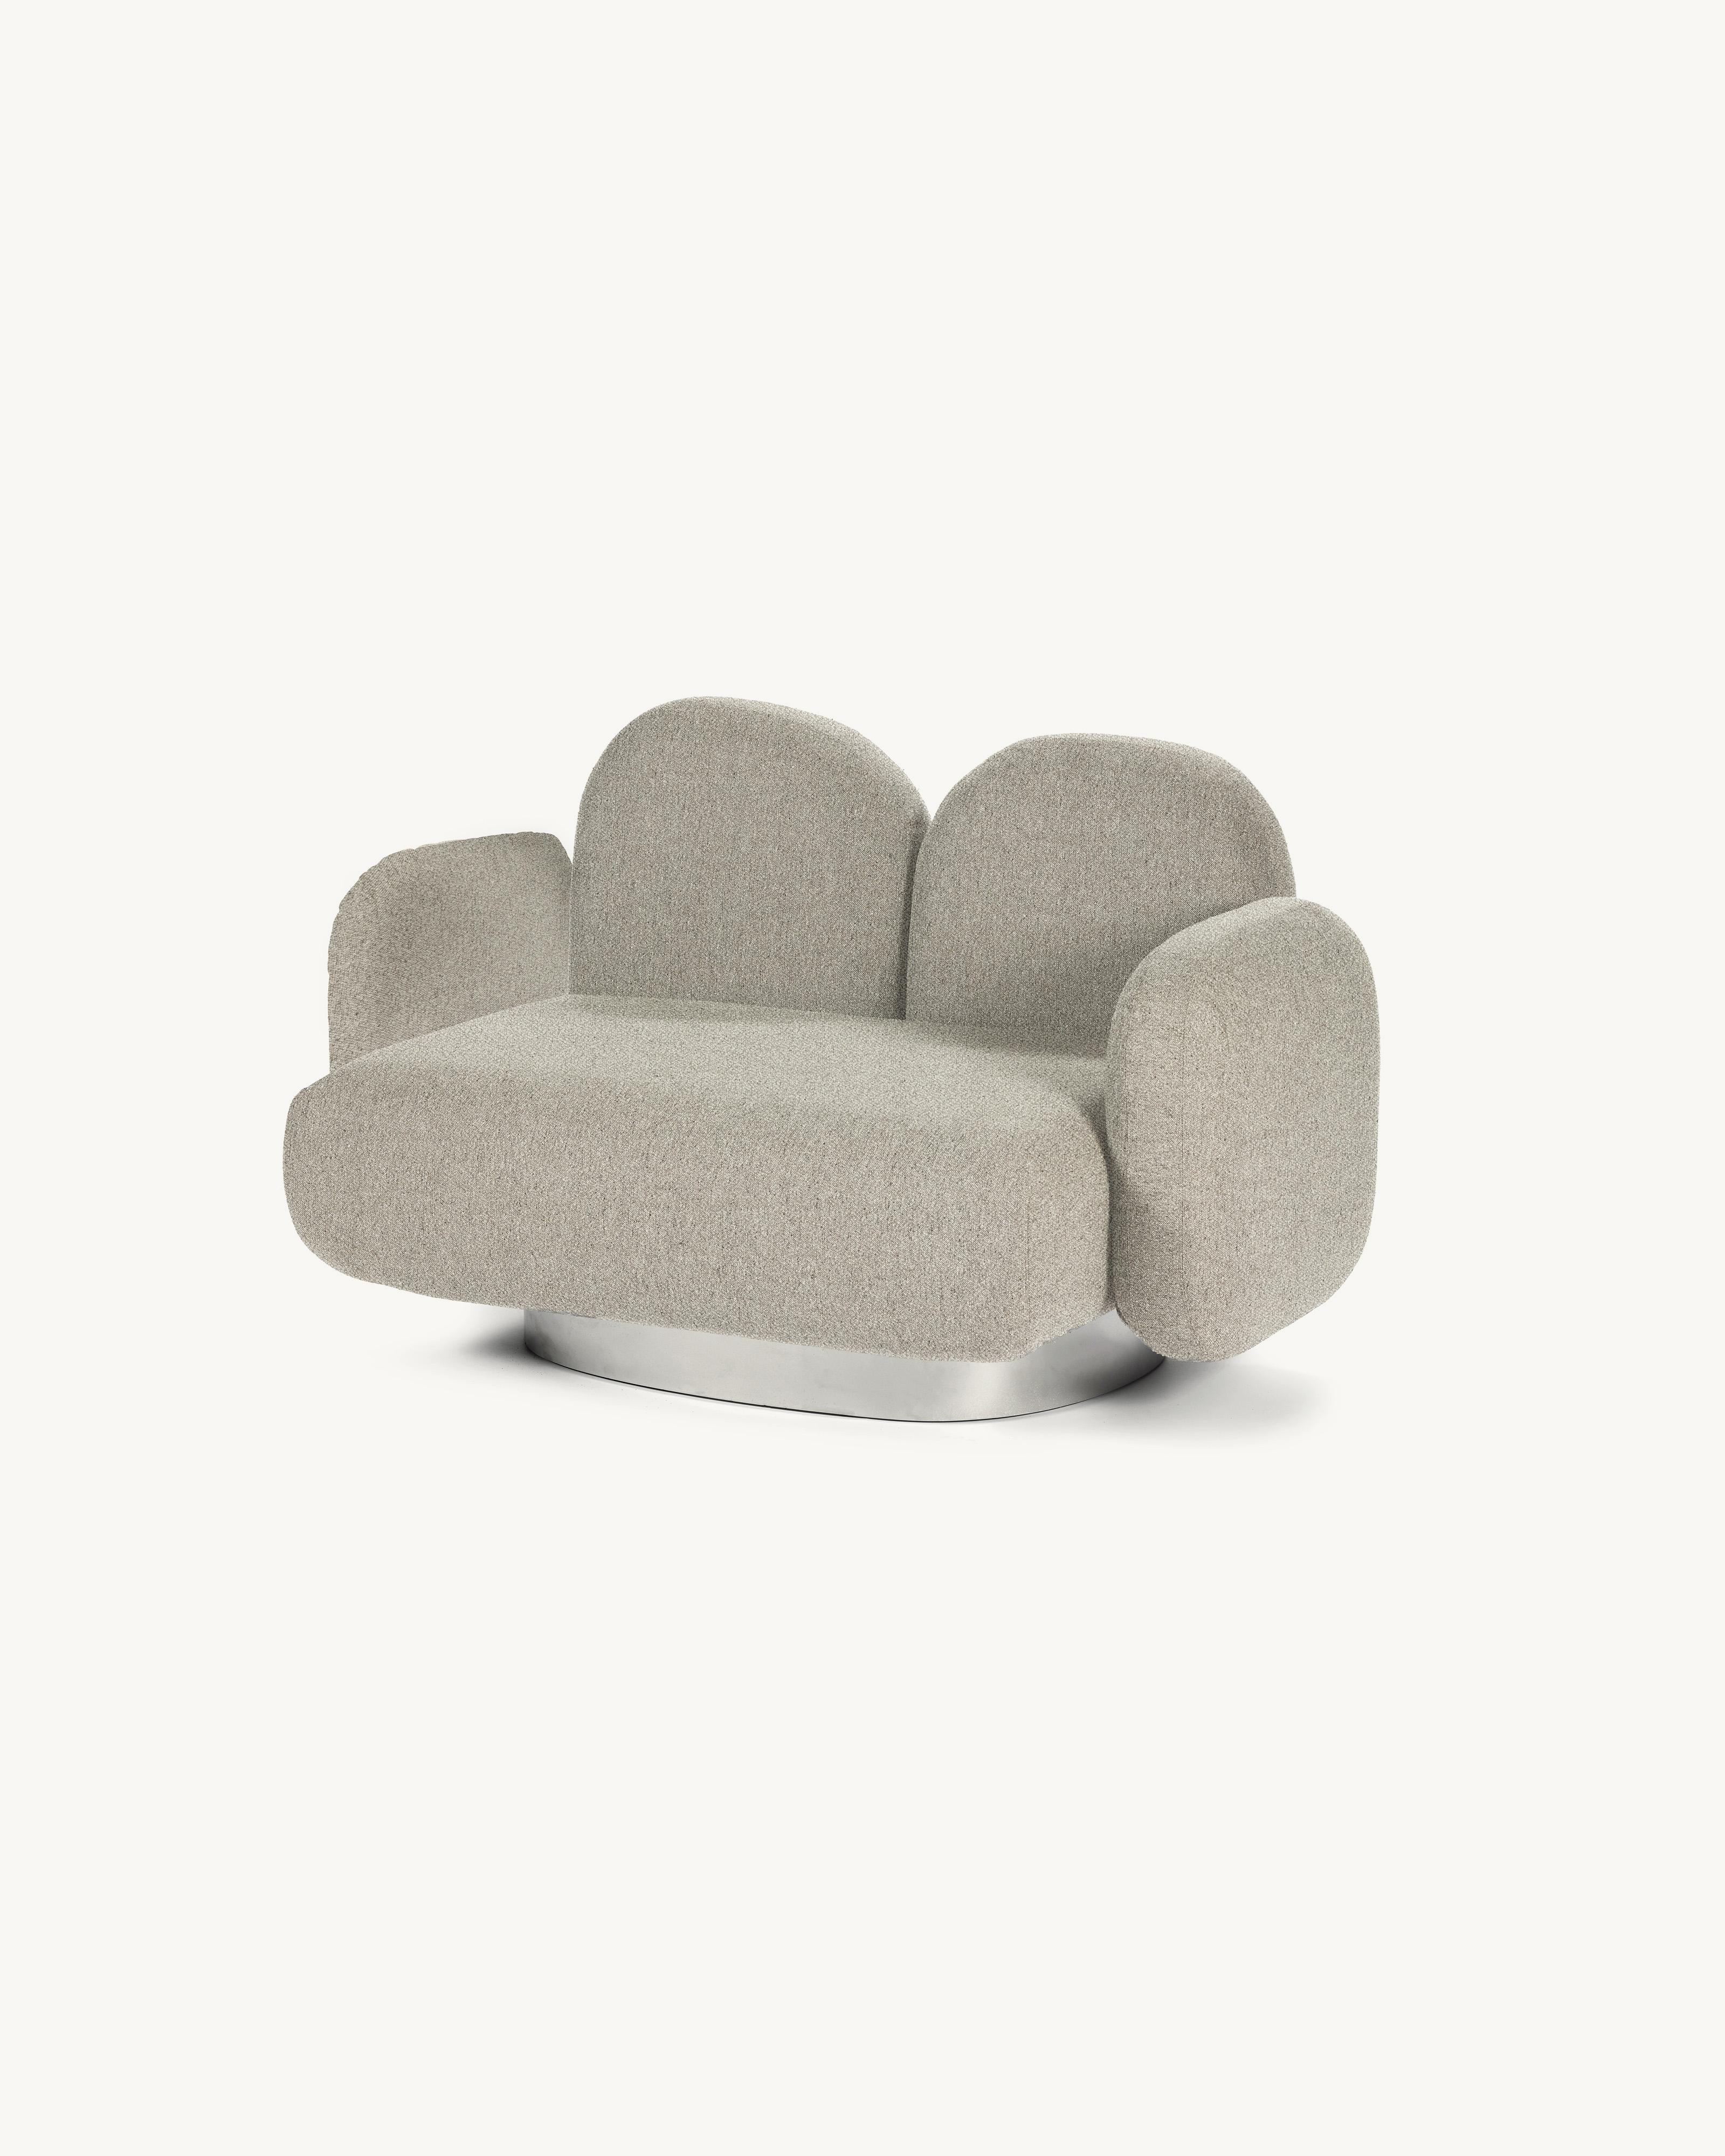 Contemporary Sofa 'Assemble' by Destroyers/Builders, 1 seater + 2 armrests For Sale 7